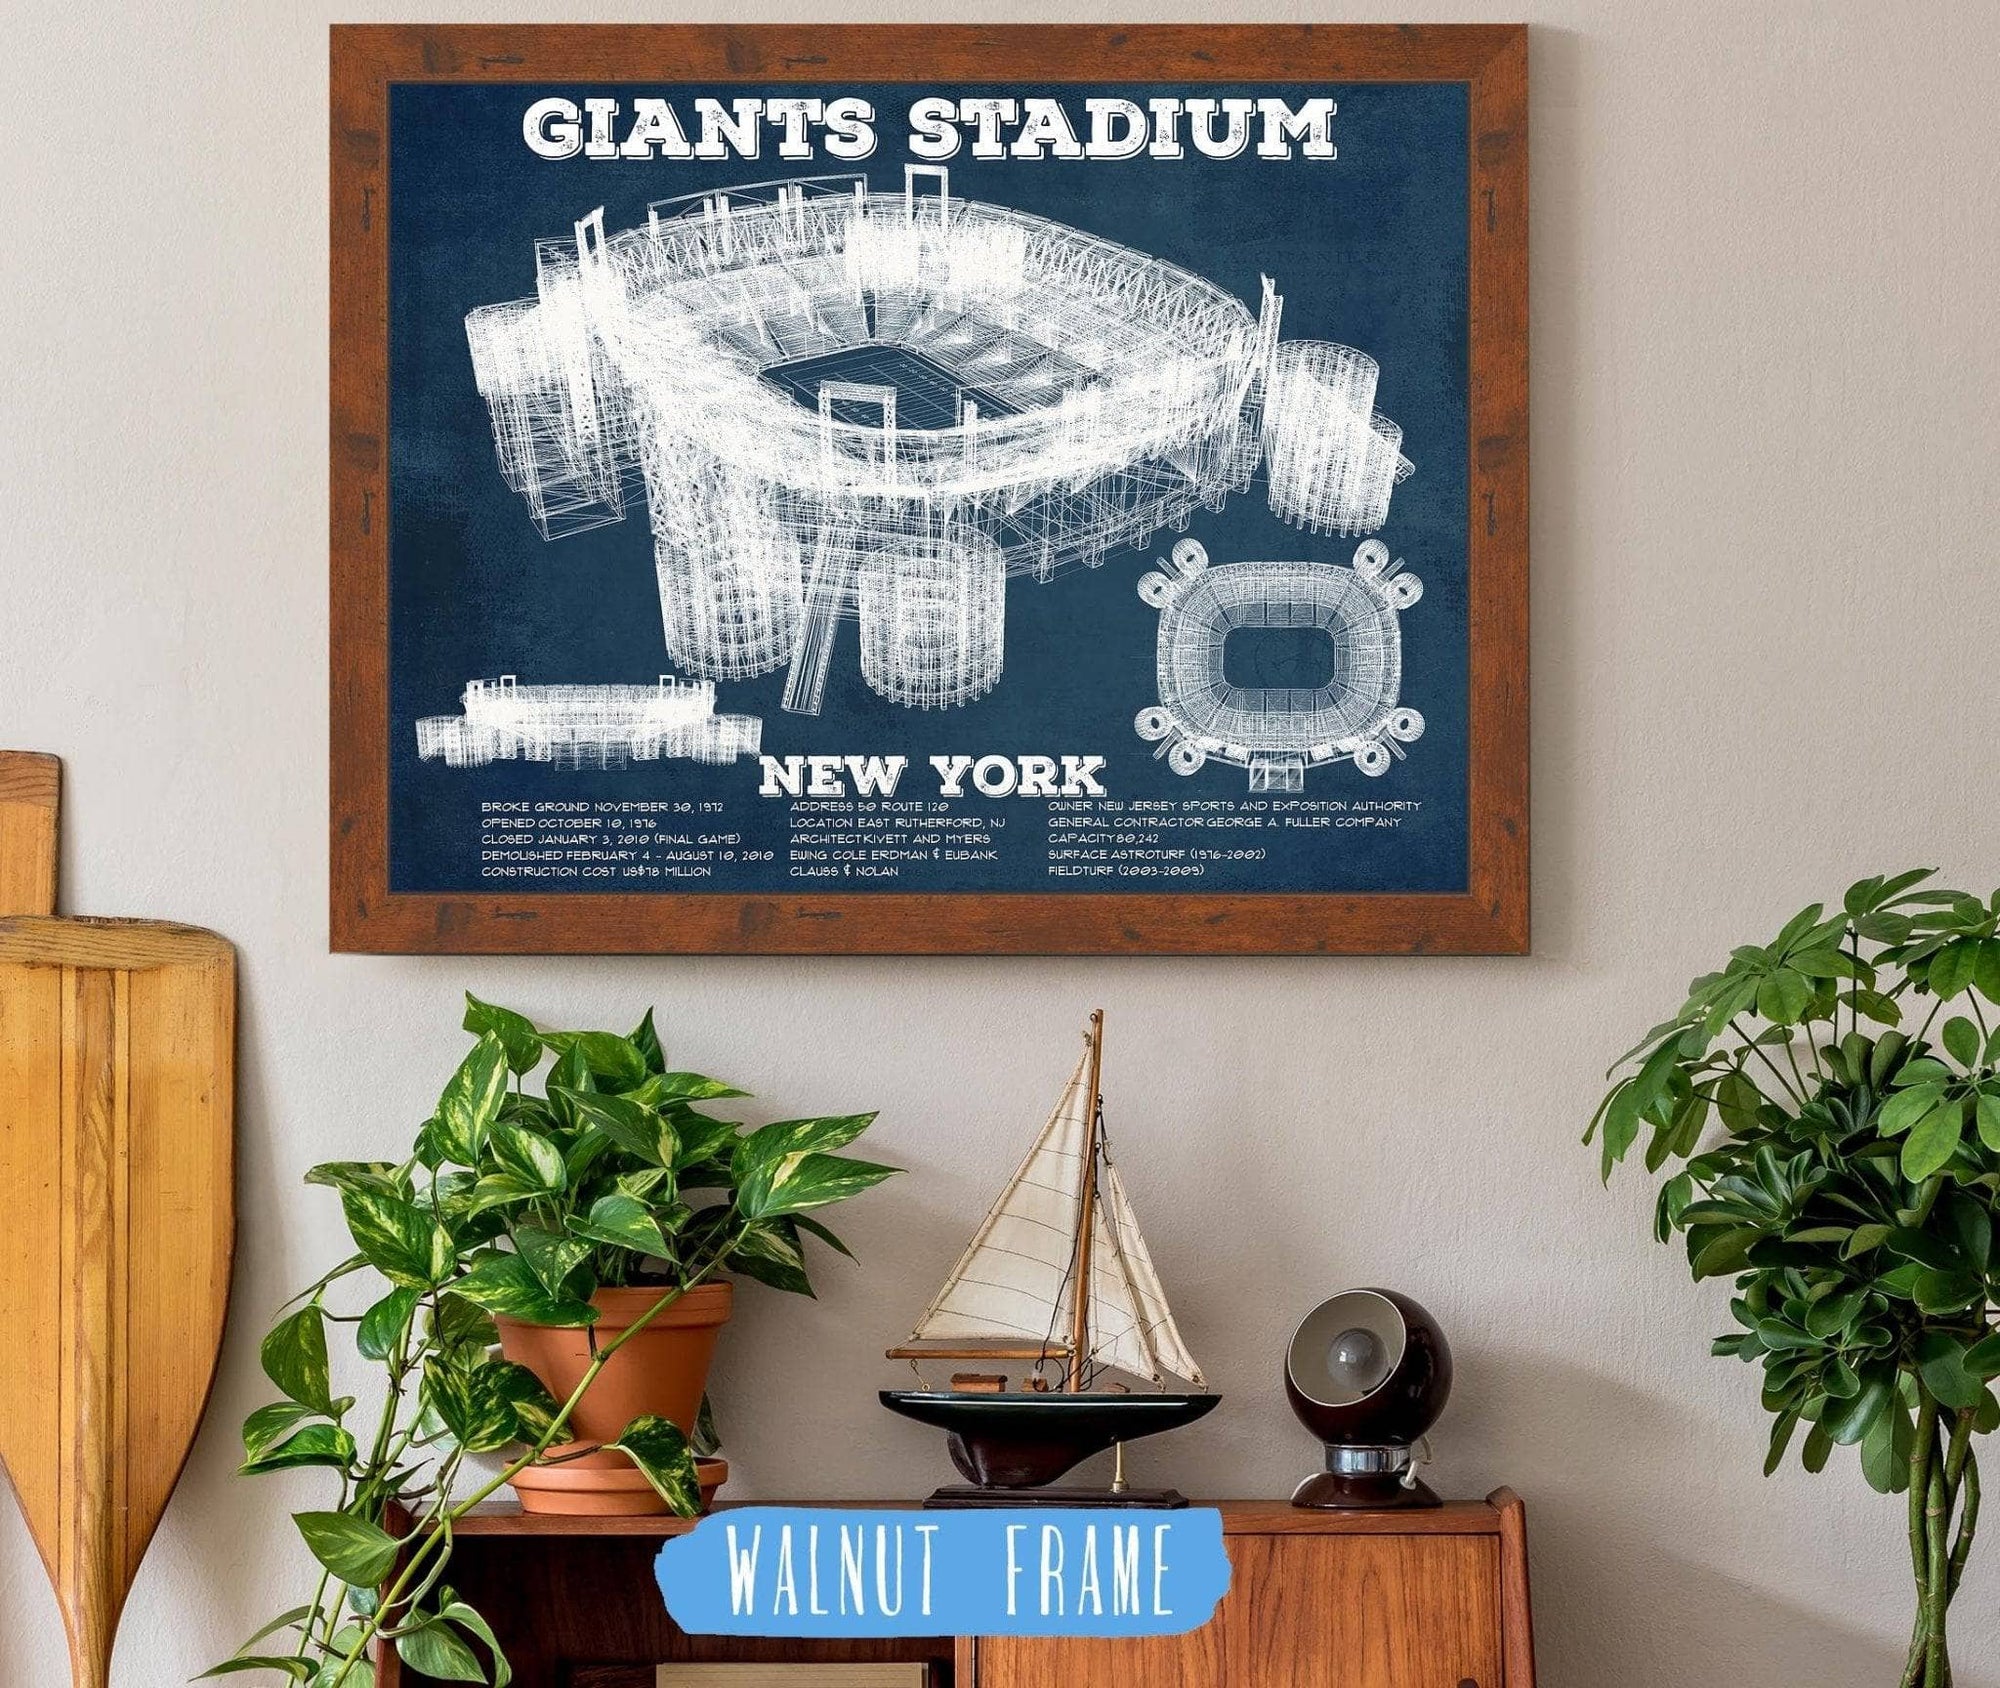 Cutler West Pro Football Collection 14" x 11" / Walnut Frame Giants Stadium - The Meadowlands New York Vintage Print 731428206-TOP